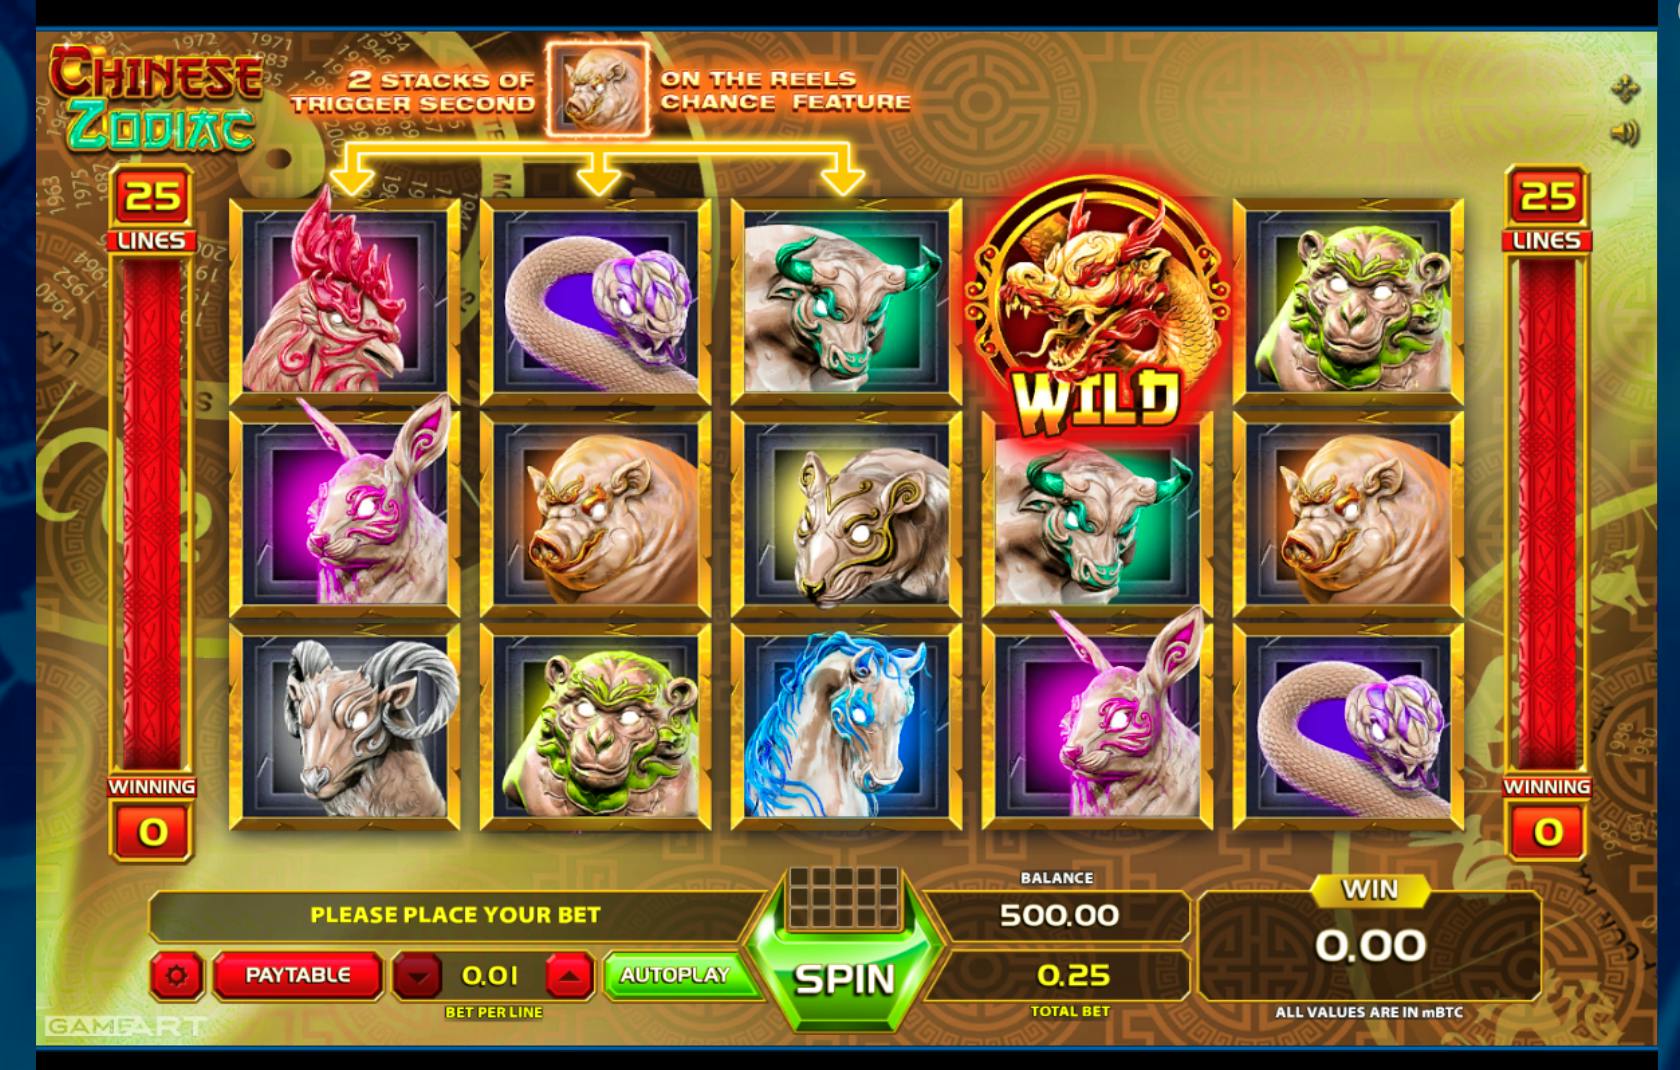 $200 down and then this happened  ‍♀️  #dragonlink #dragonlinkslotmachine #slots #mamacipslots